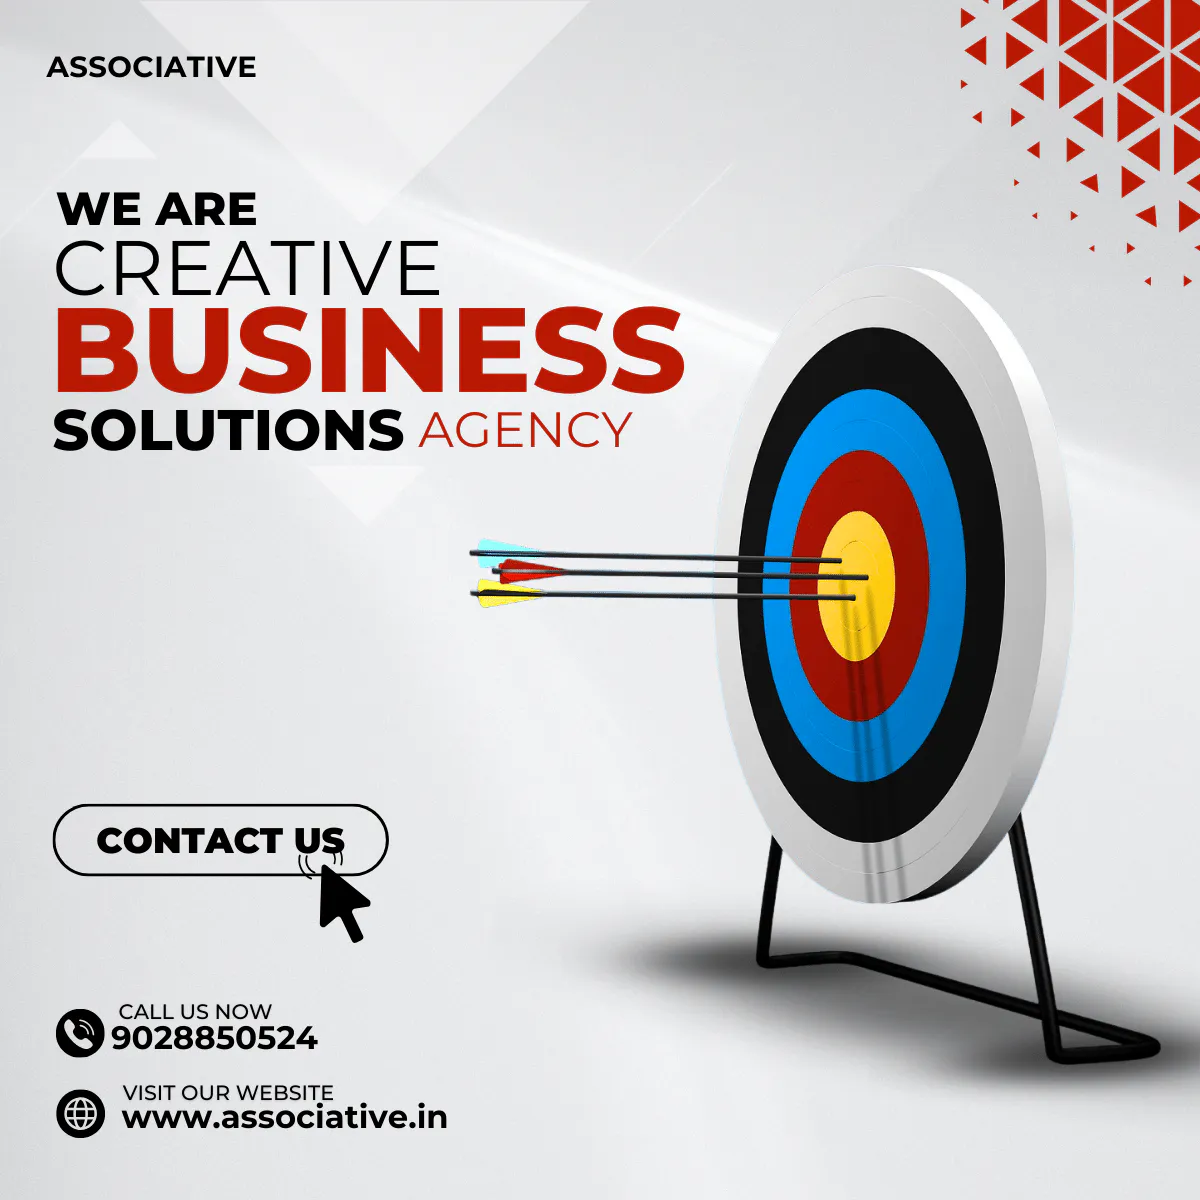 Your Marketing and Digital Marketing Partner in India